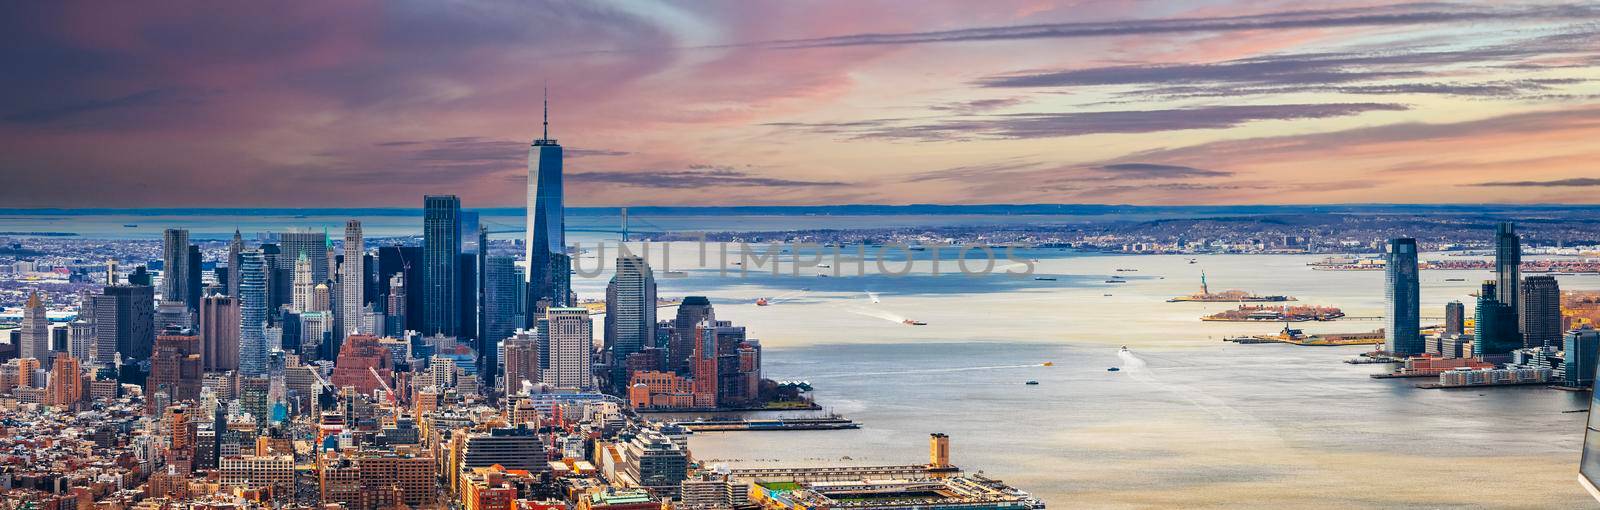 New York City and New Jersey skyline panoramic sunset view by xbrchx